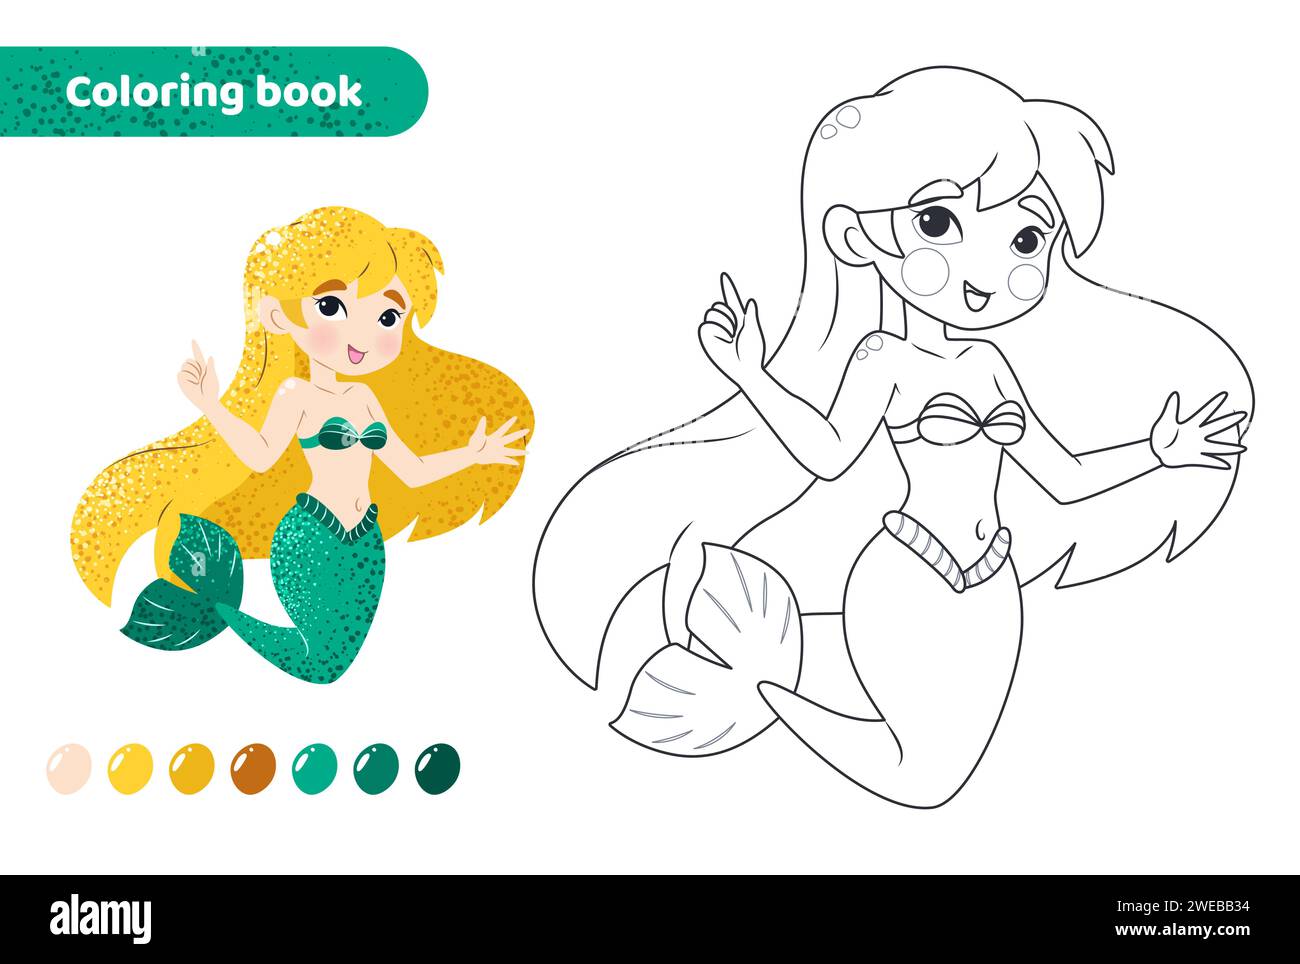 Coloring book for kids. Cute mermaid with tail. Stock Vector